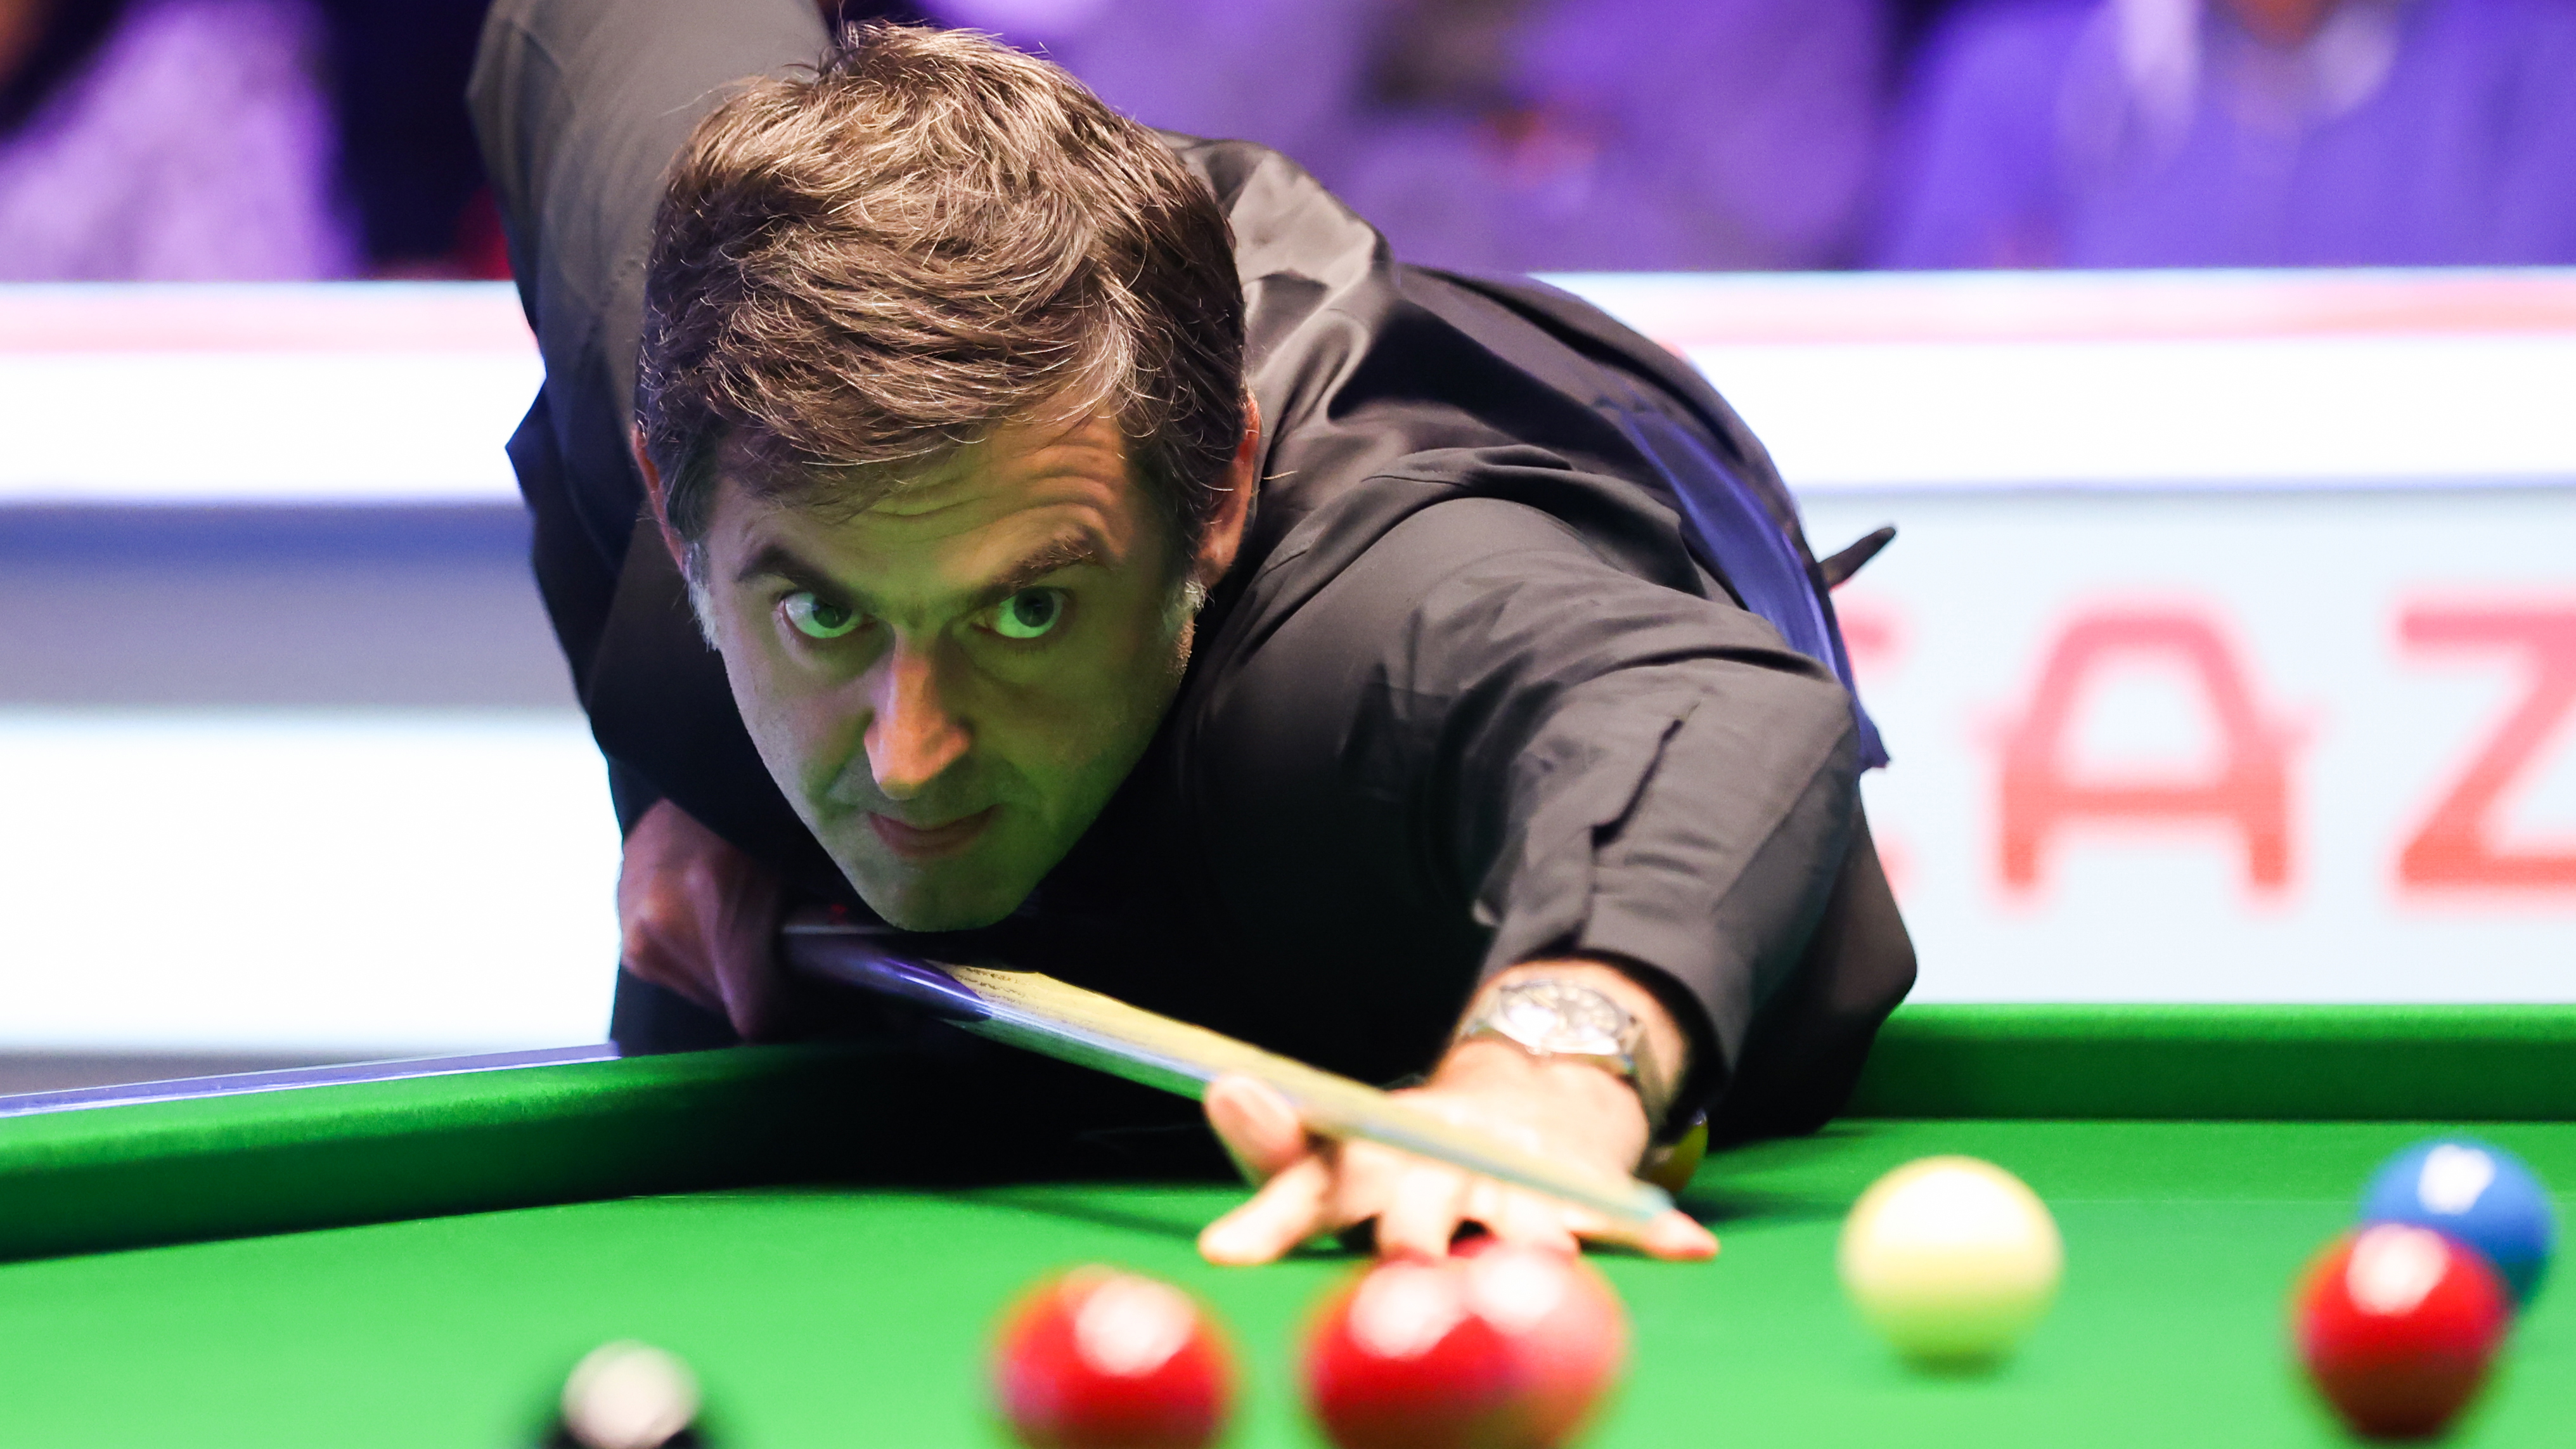 Snooker results Ronnie OSullivan marches into UK Championship quarter- finals after York defeat of Zhou Yuelong